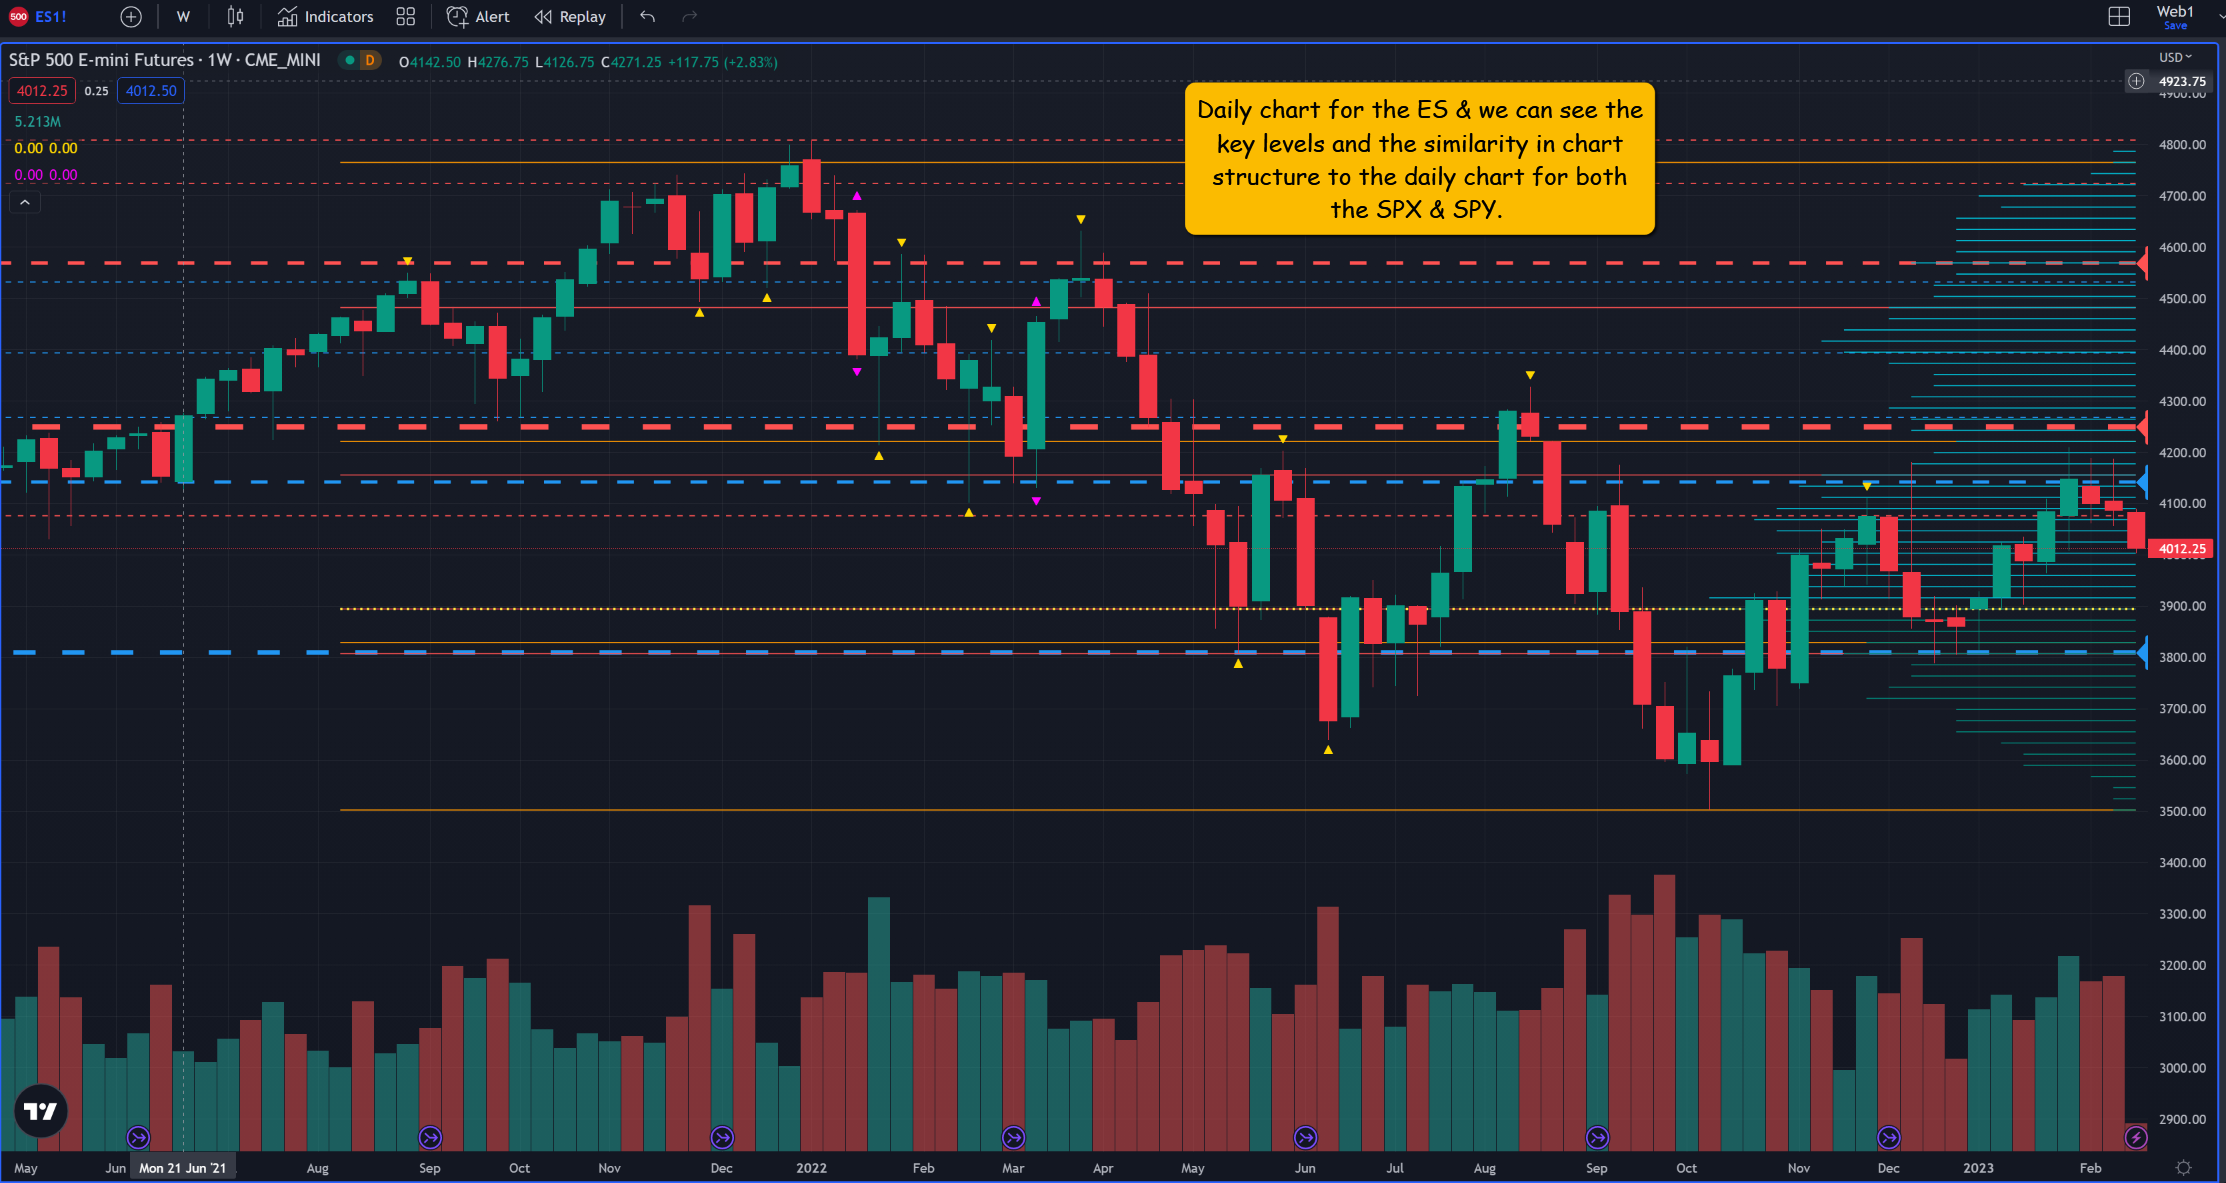 S&P 500 Futures, Weekly Chart